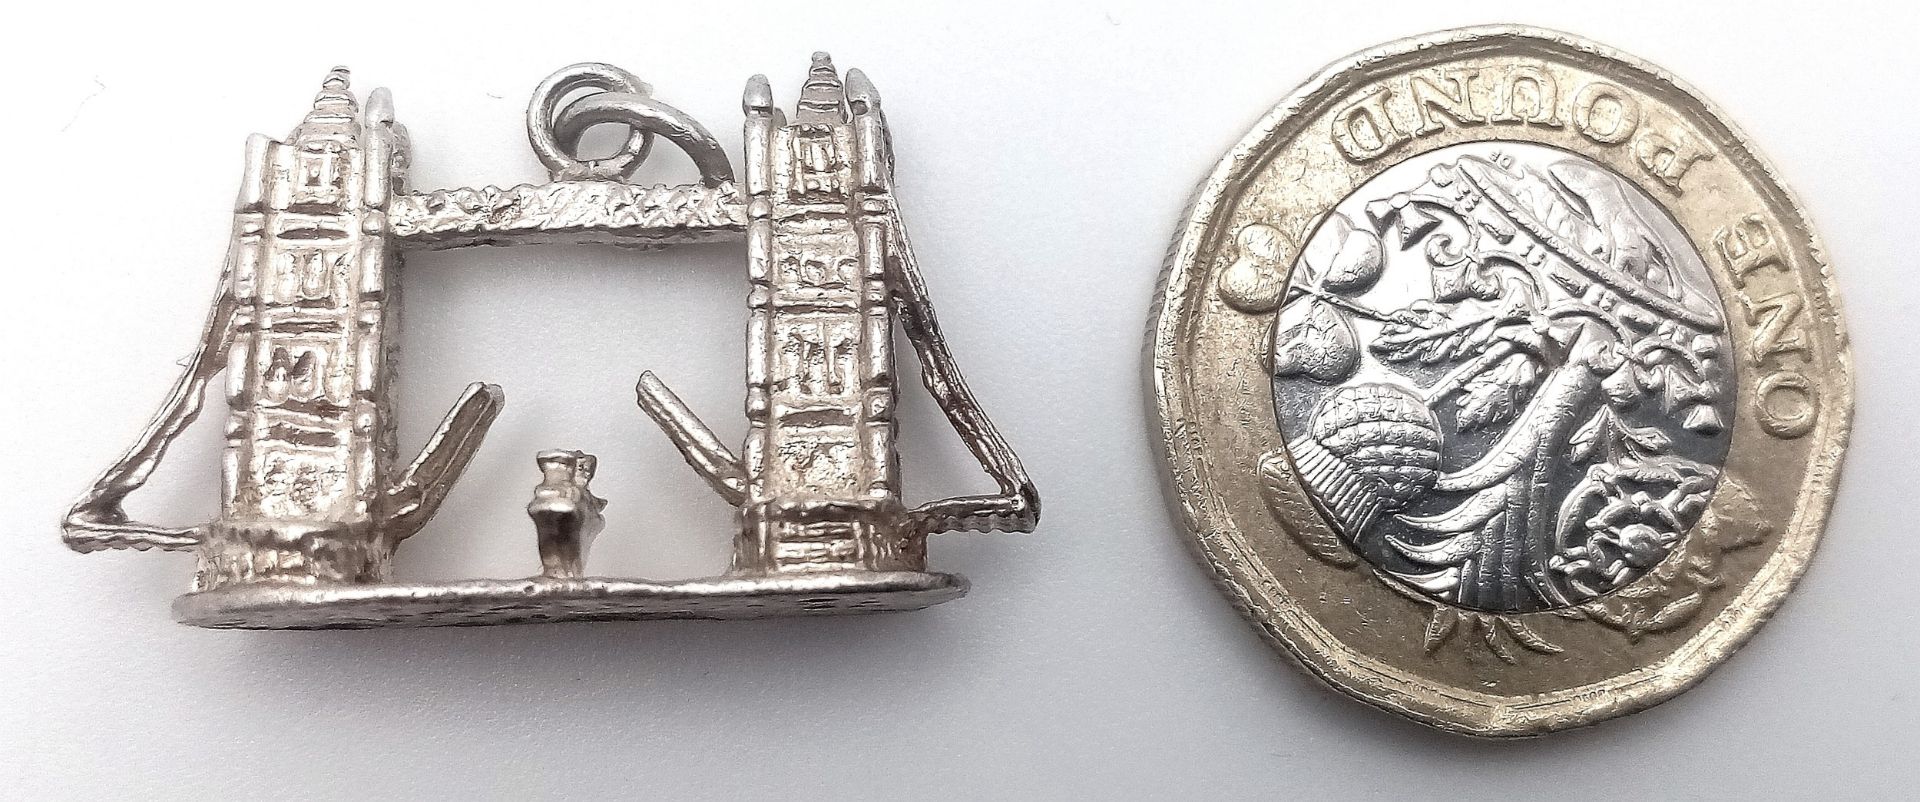 A STERLING SILVER LONDON THEMED TOWER BRIDGE CHARM/PENDANT. 3cm x 2.1cm, 6.5g weight. Ref: SC 8102 - Image 4 of 5